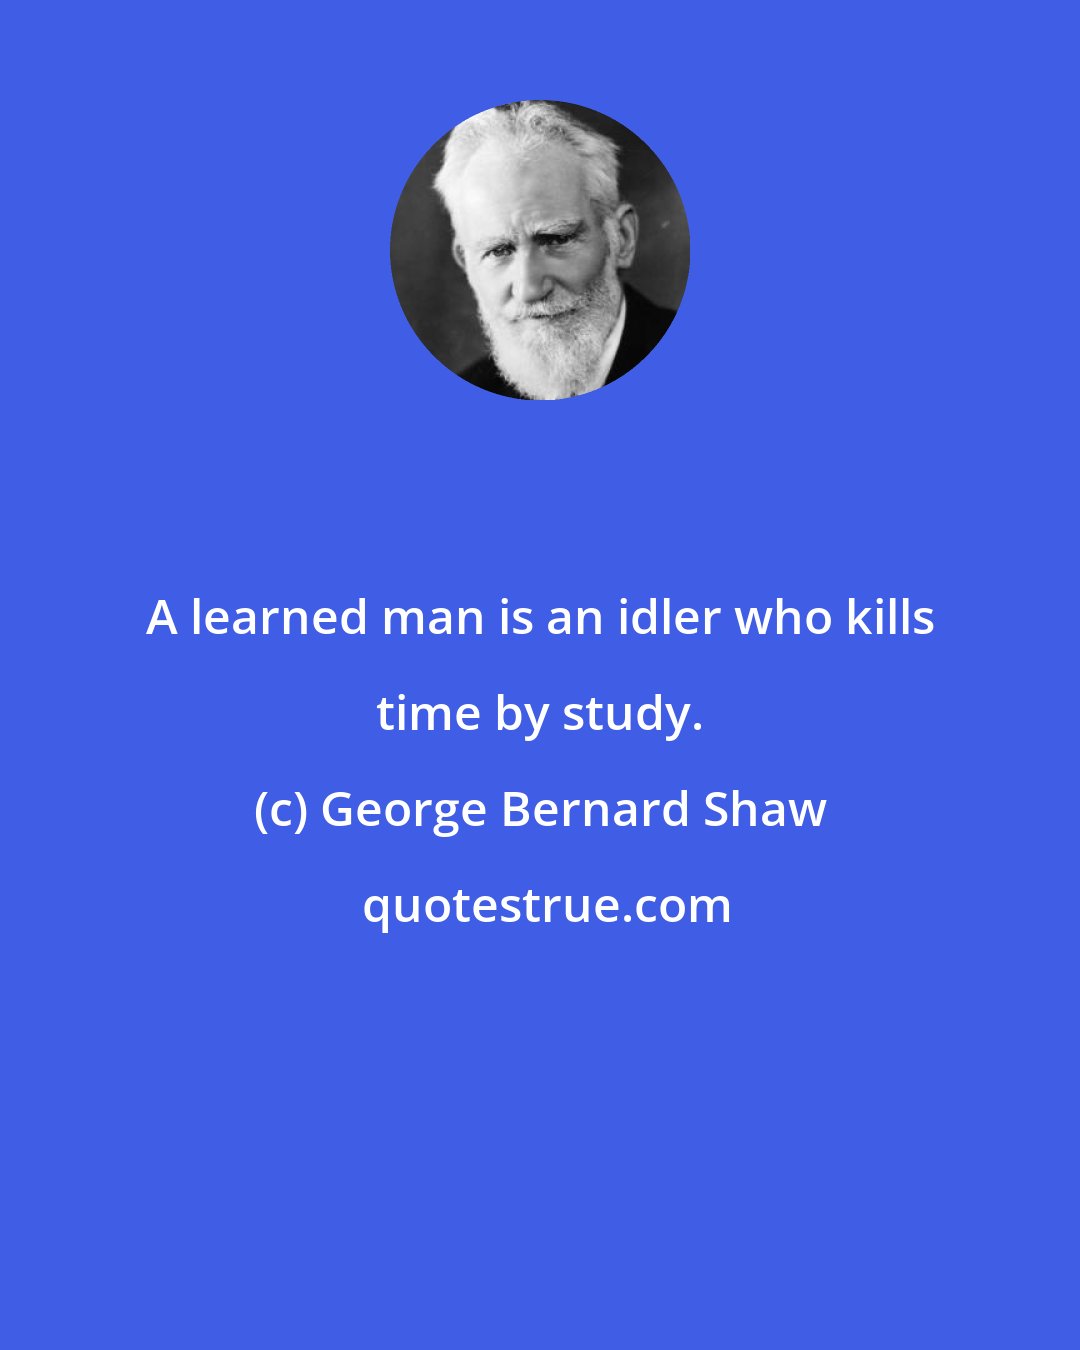 George Bernard Shaw: A learned man is an idler who kills time by study.